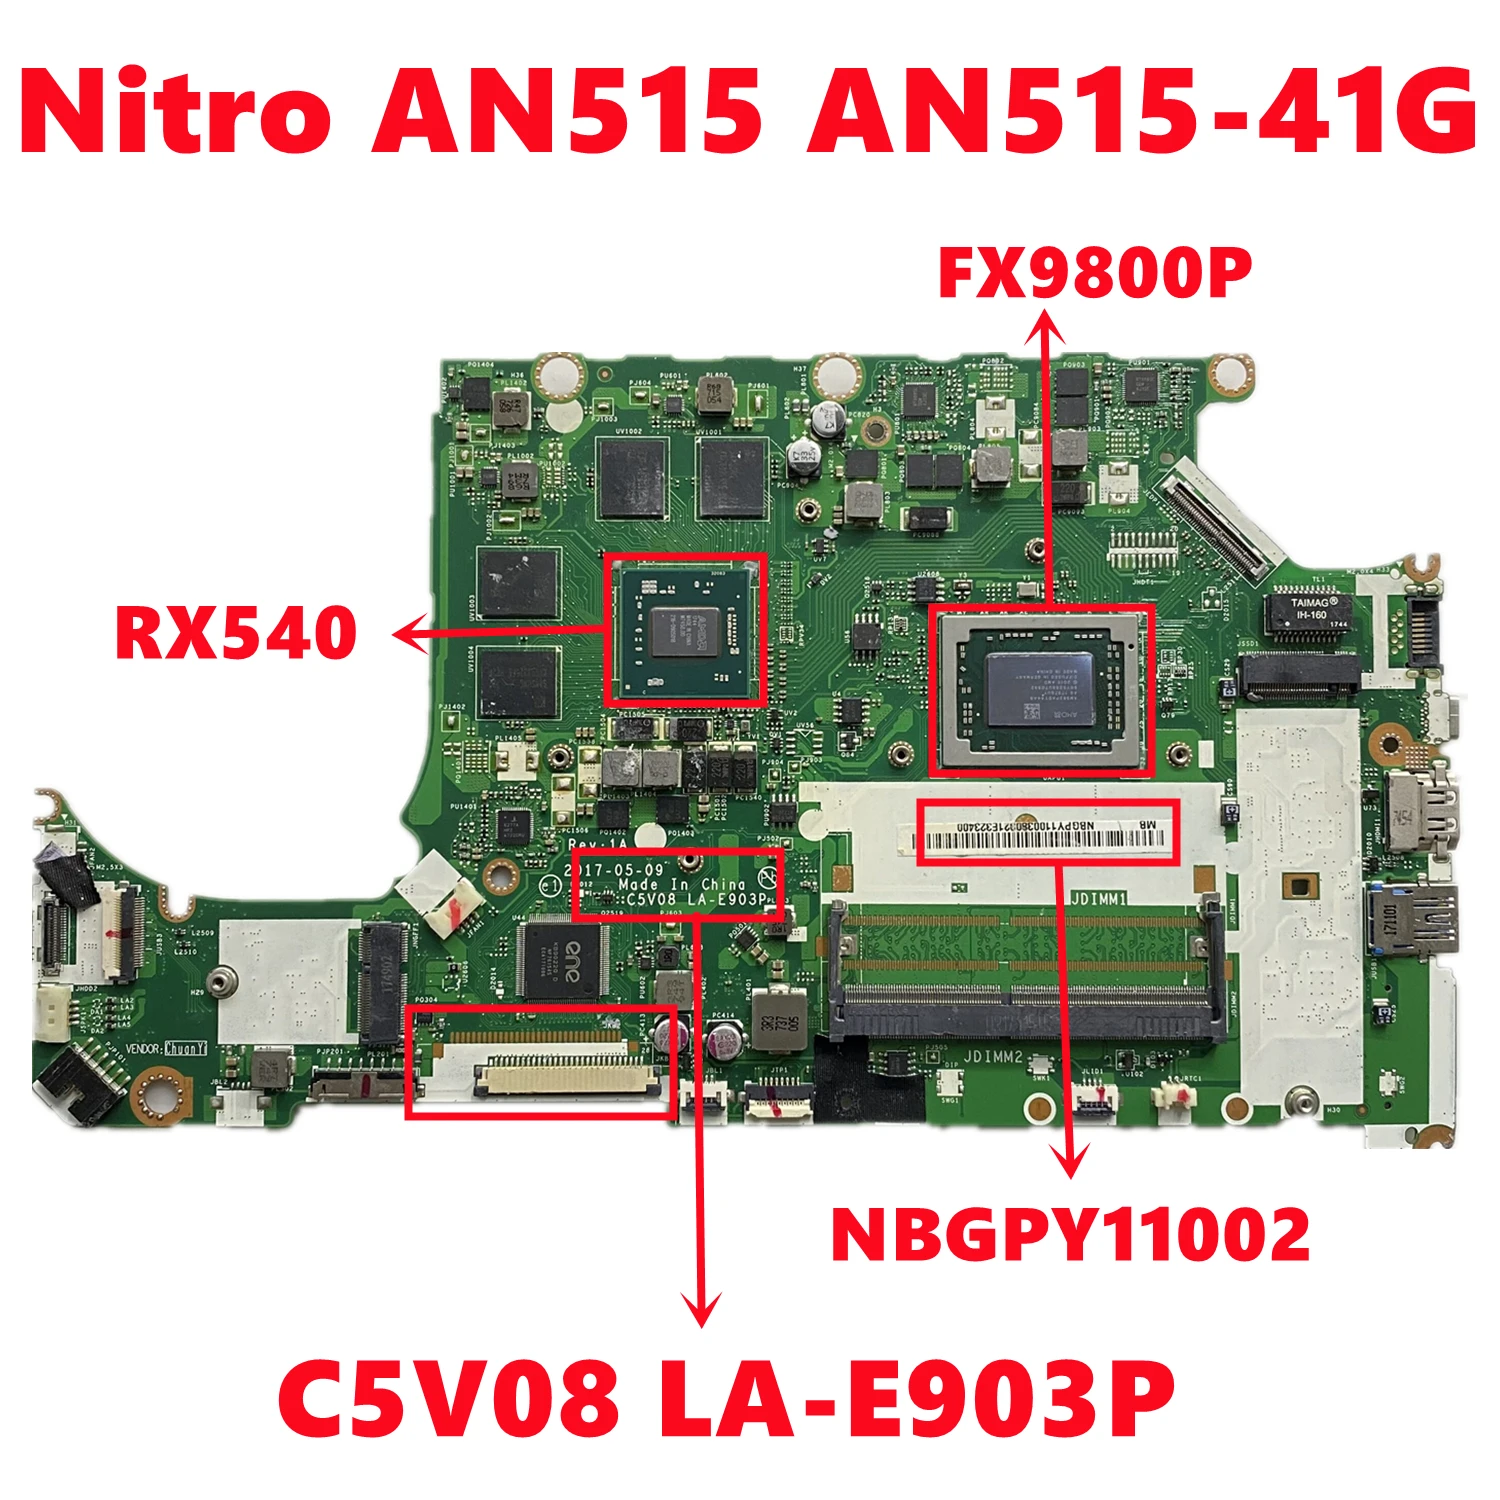 

NBGPY11002 NB.GPY11.002 For Acer Nitro AN515 AN515-41G Laptop Motherboard C5V08 LA-E903P With FX-9800P 216-0905018 100% Test OK